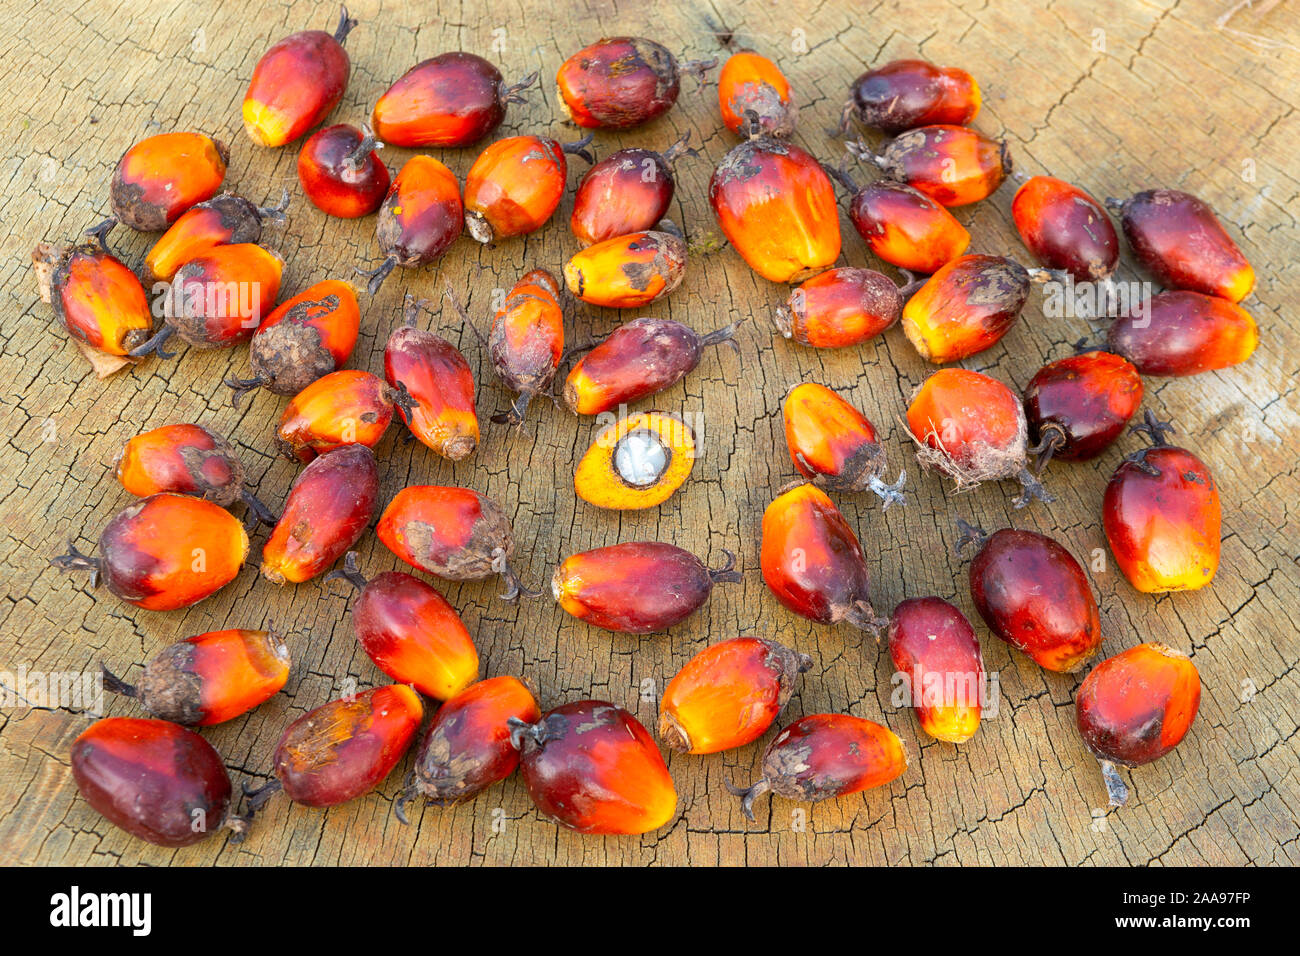 Closeup of group of palm oil fruits (Elaeis guineensis) and a halved fruit showing interior on rustic wooden table. Concept of nature, agriculture. Stock Photo